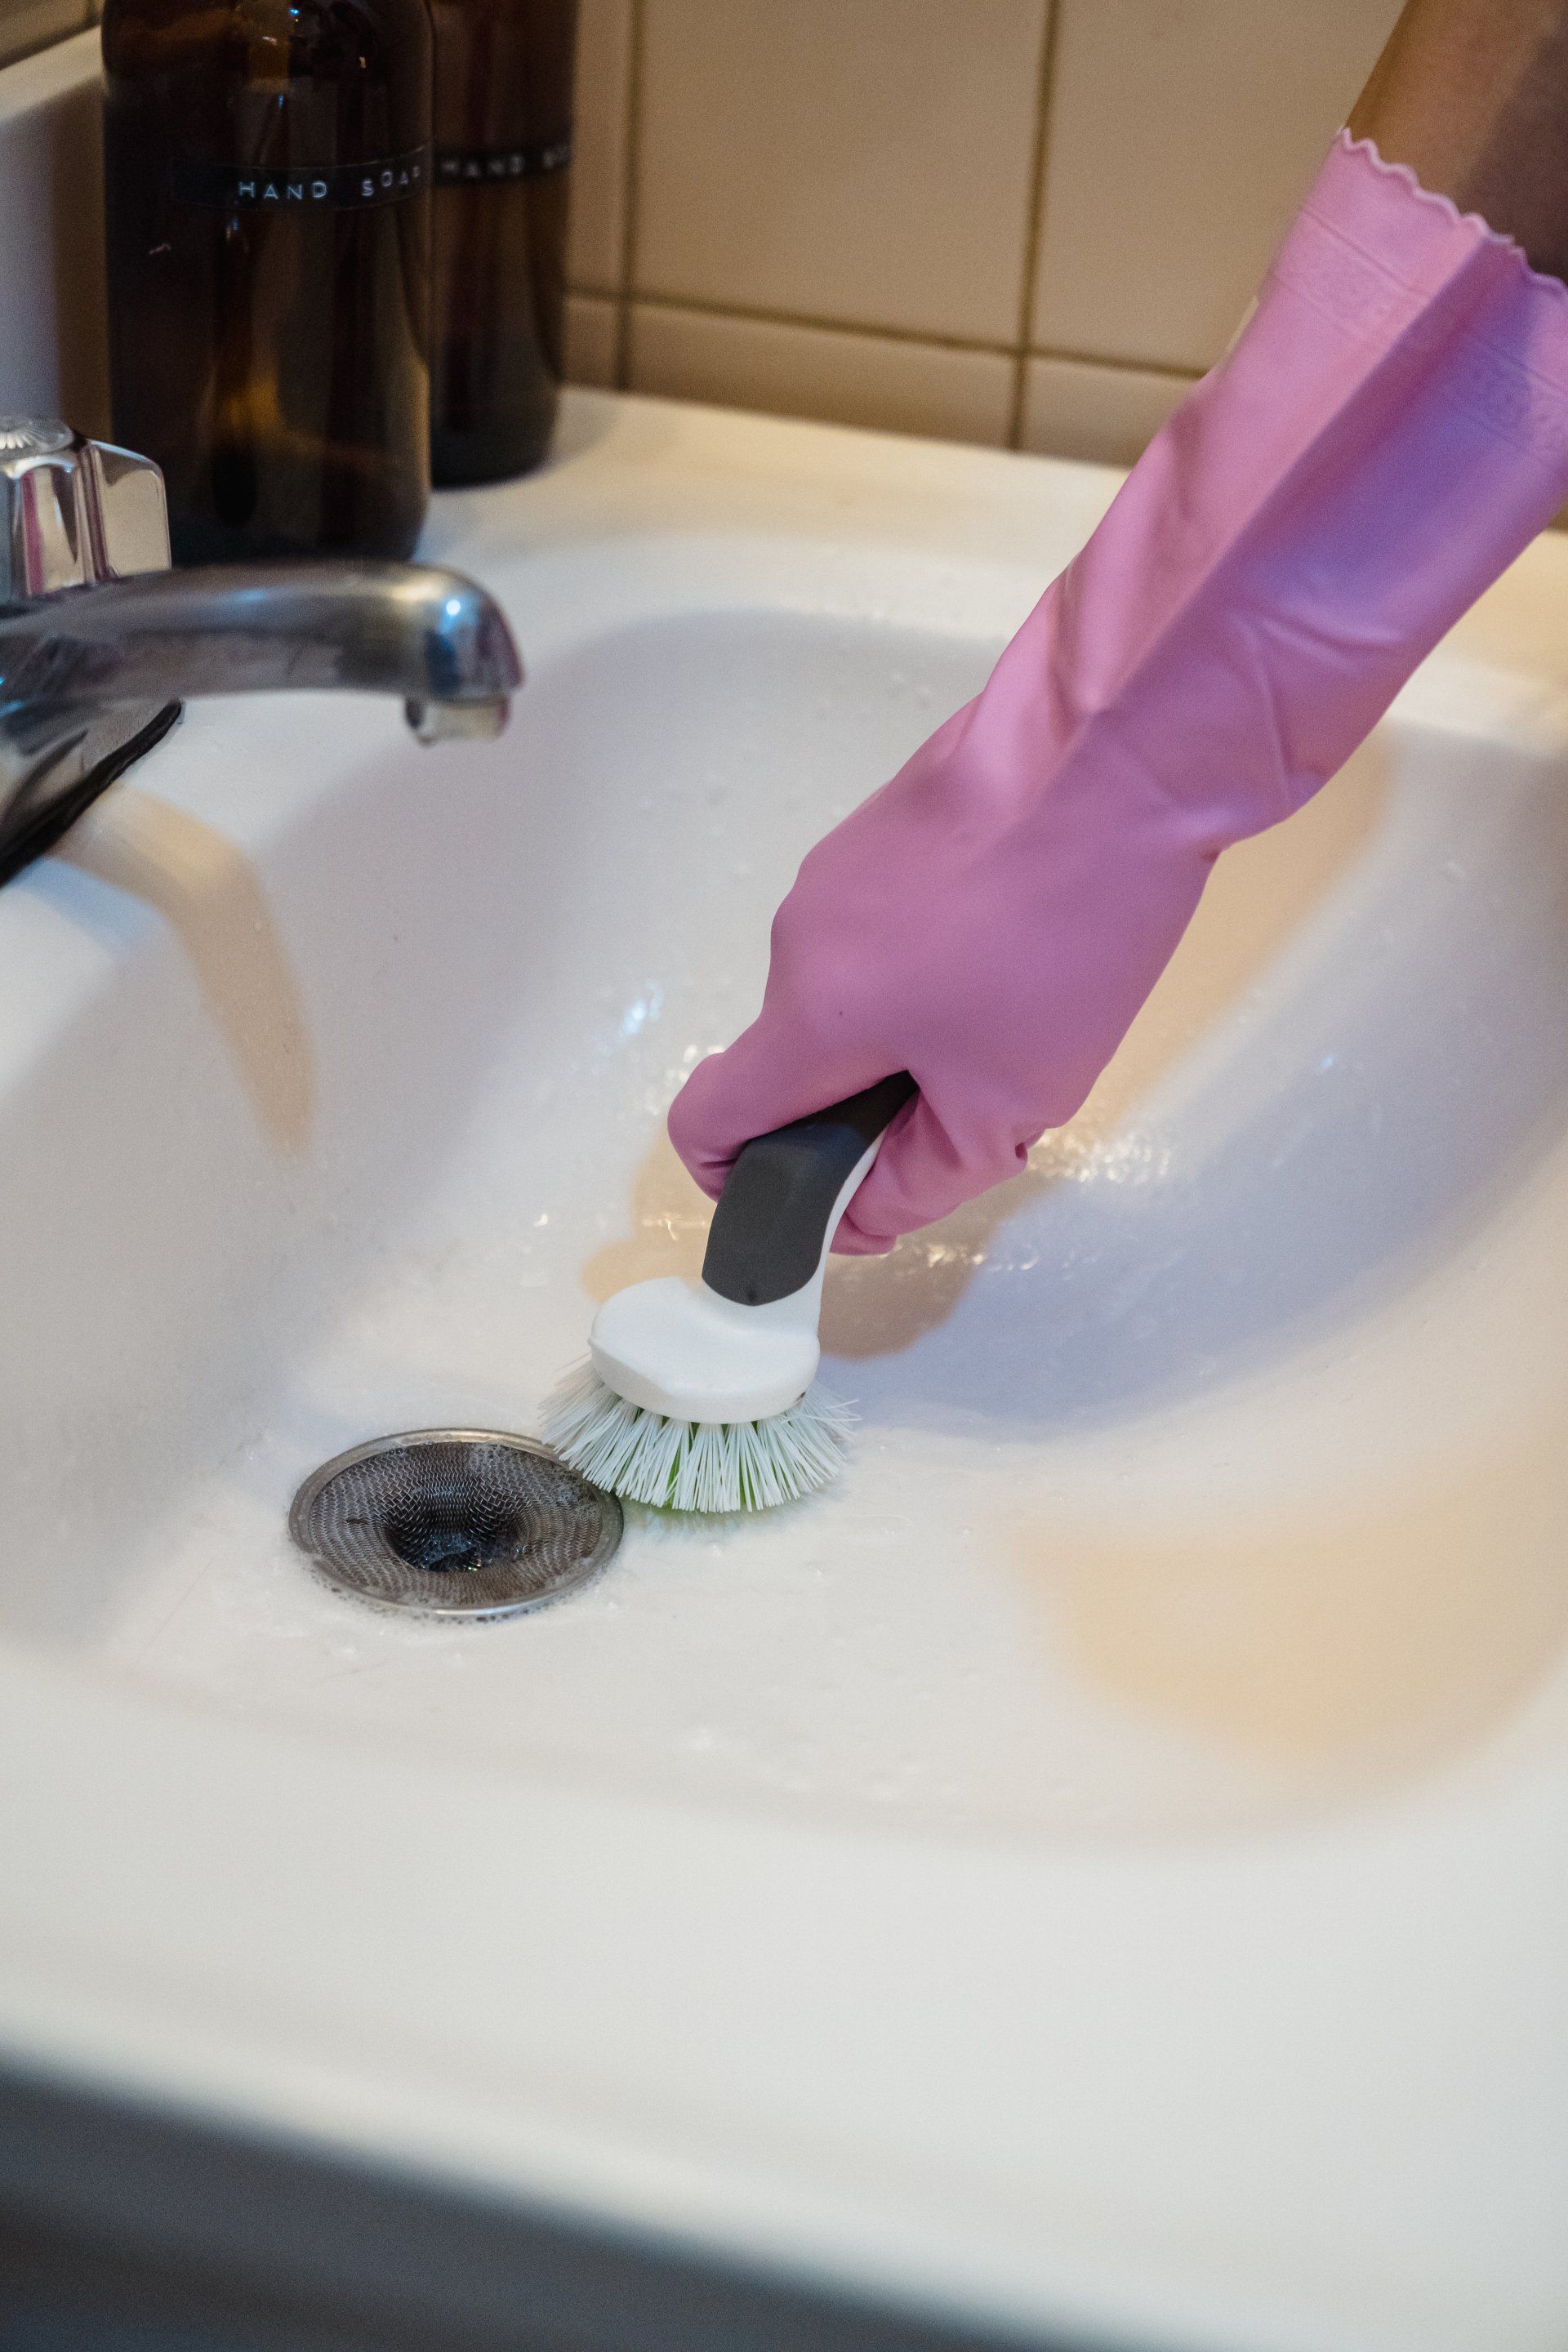 a person cleaning a sink